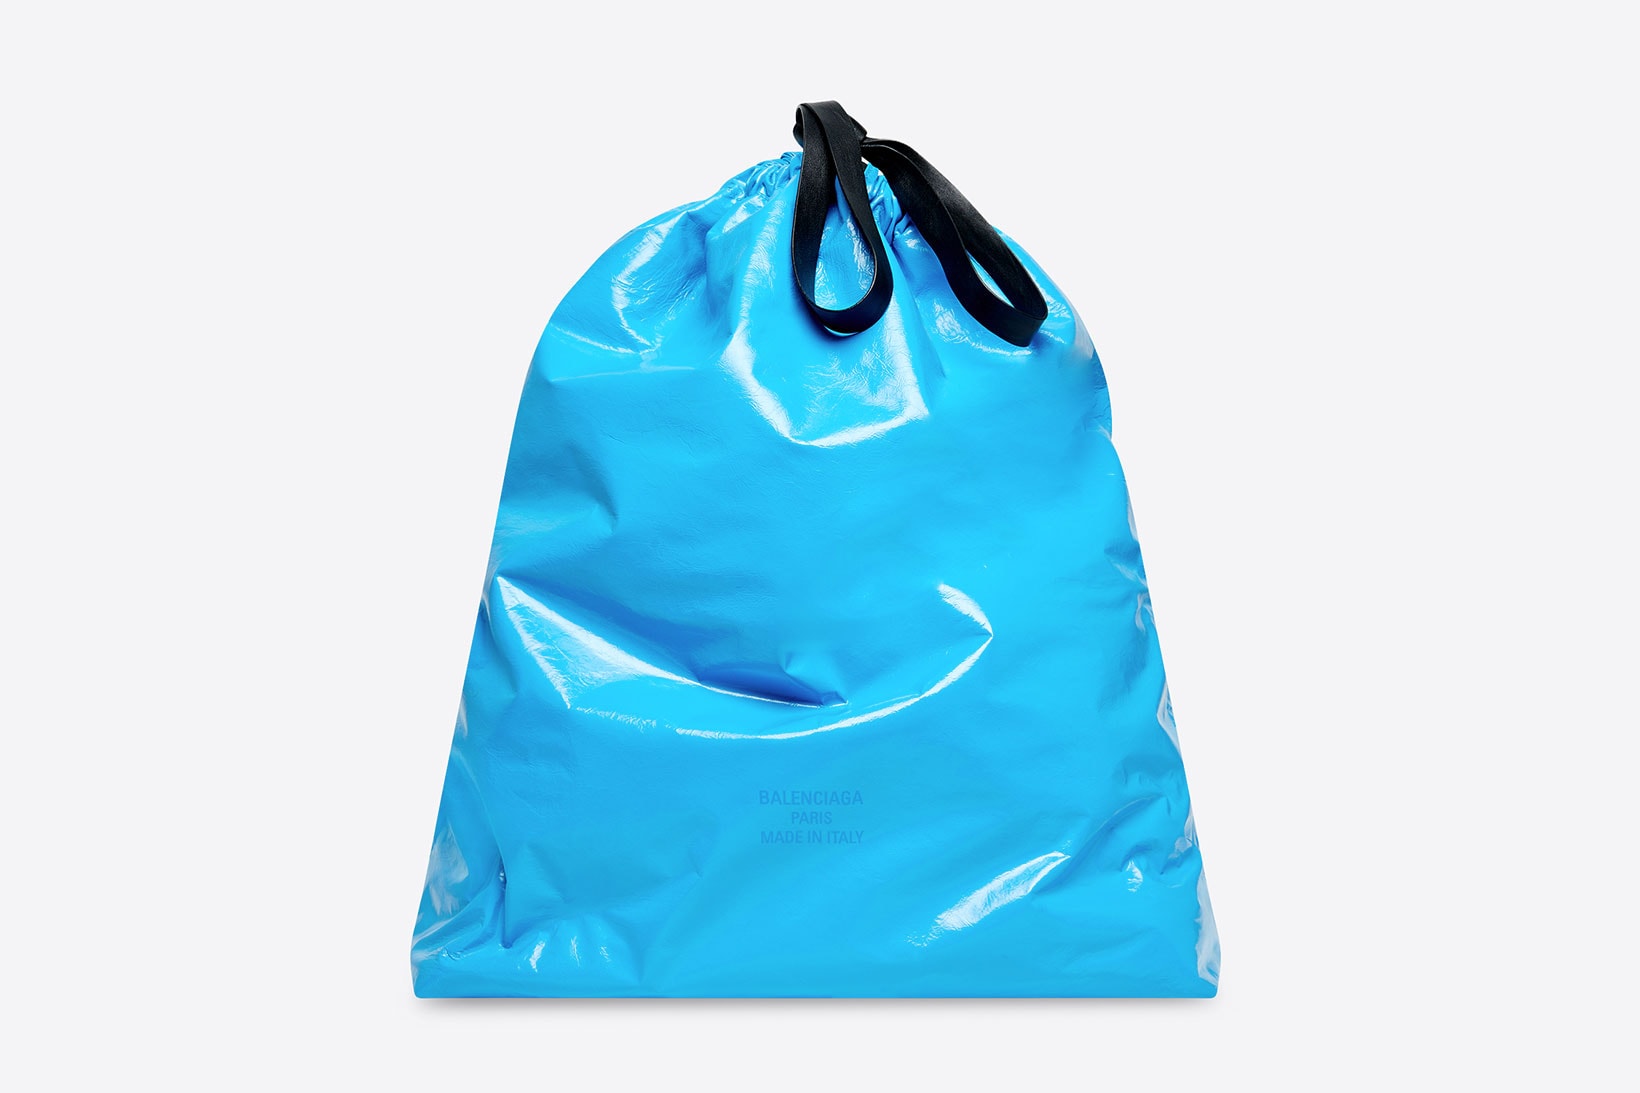 Buy a Balenciaga sack modeled after a plastic garbage bag for $1790